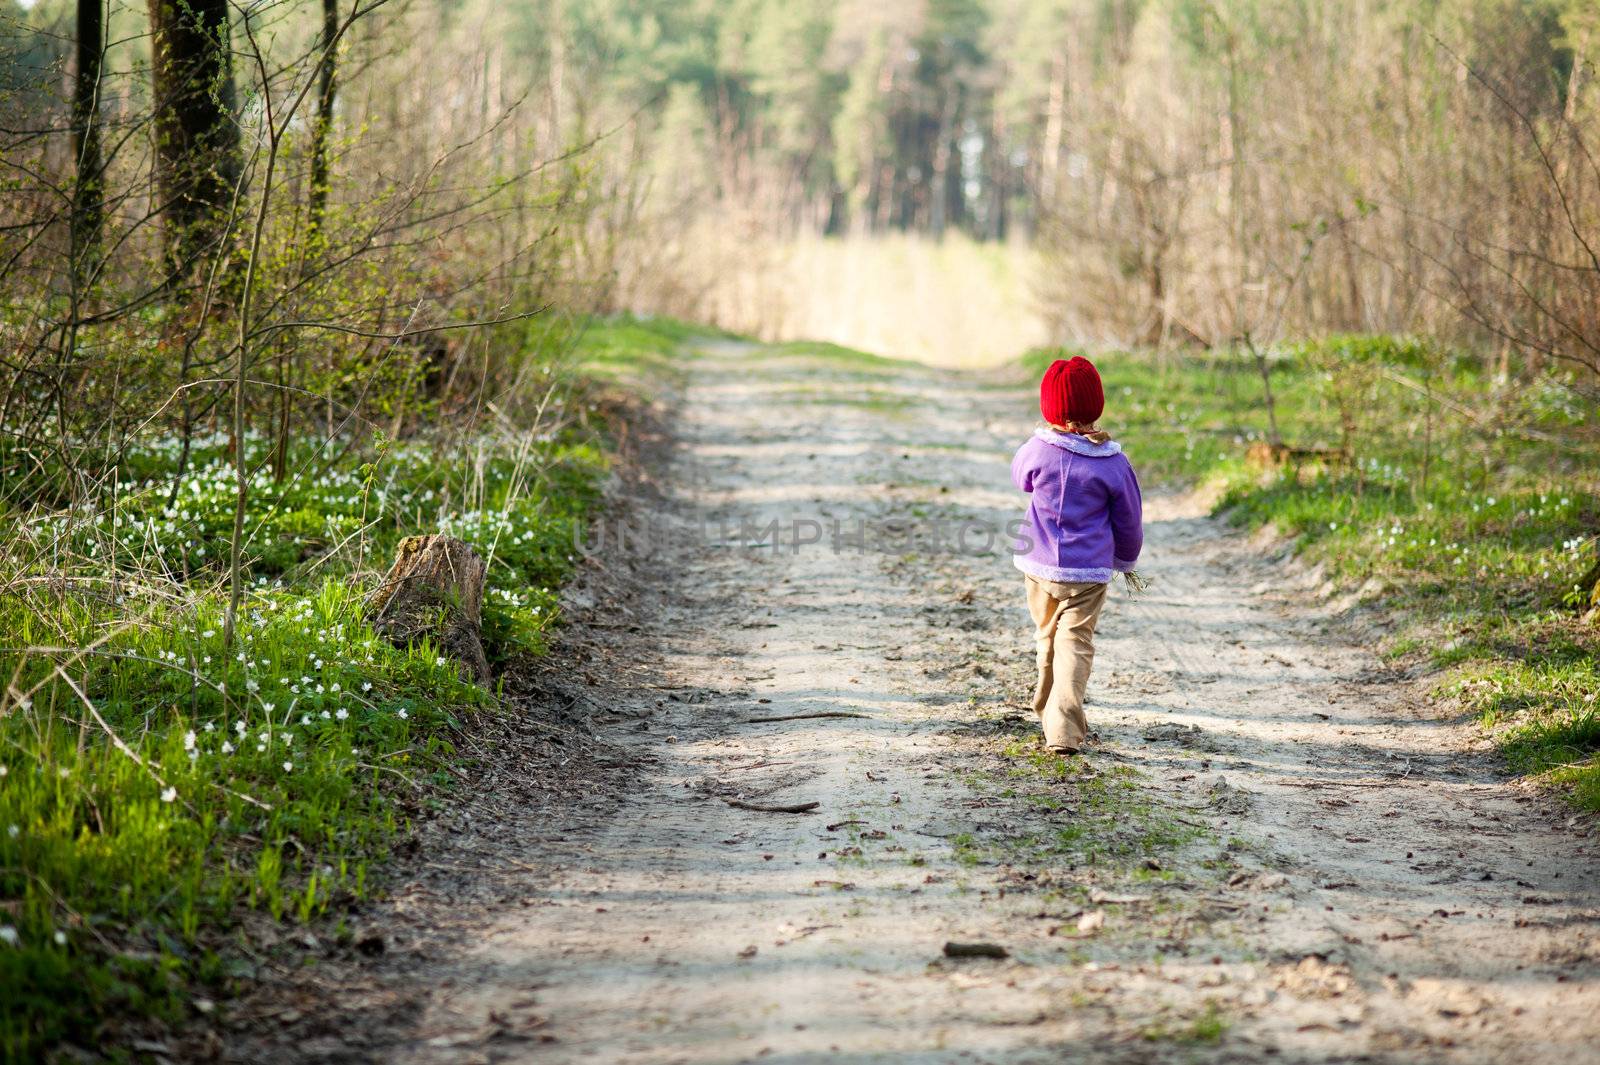 An image of a little girl walking in the forest